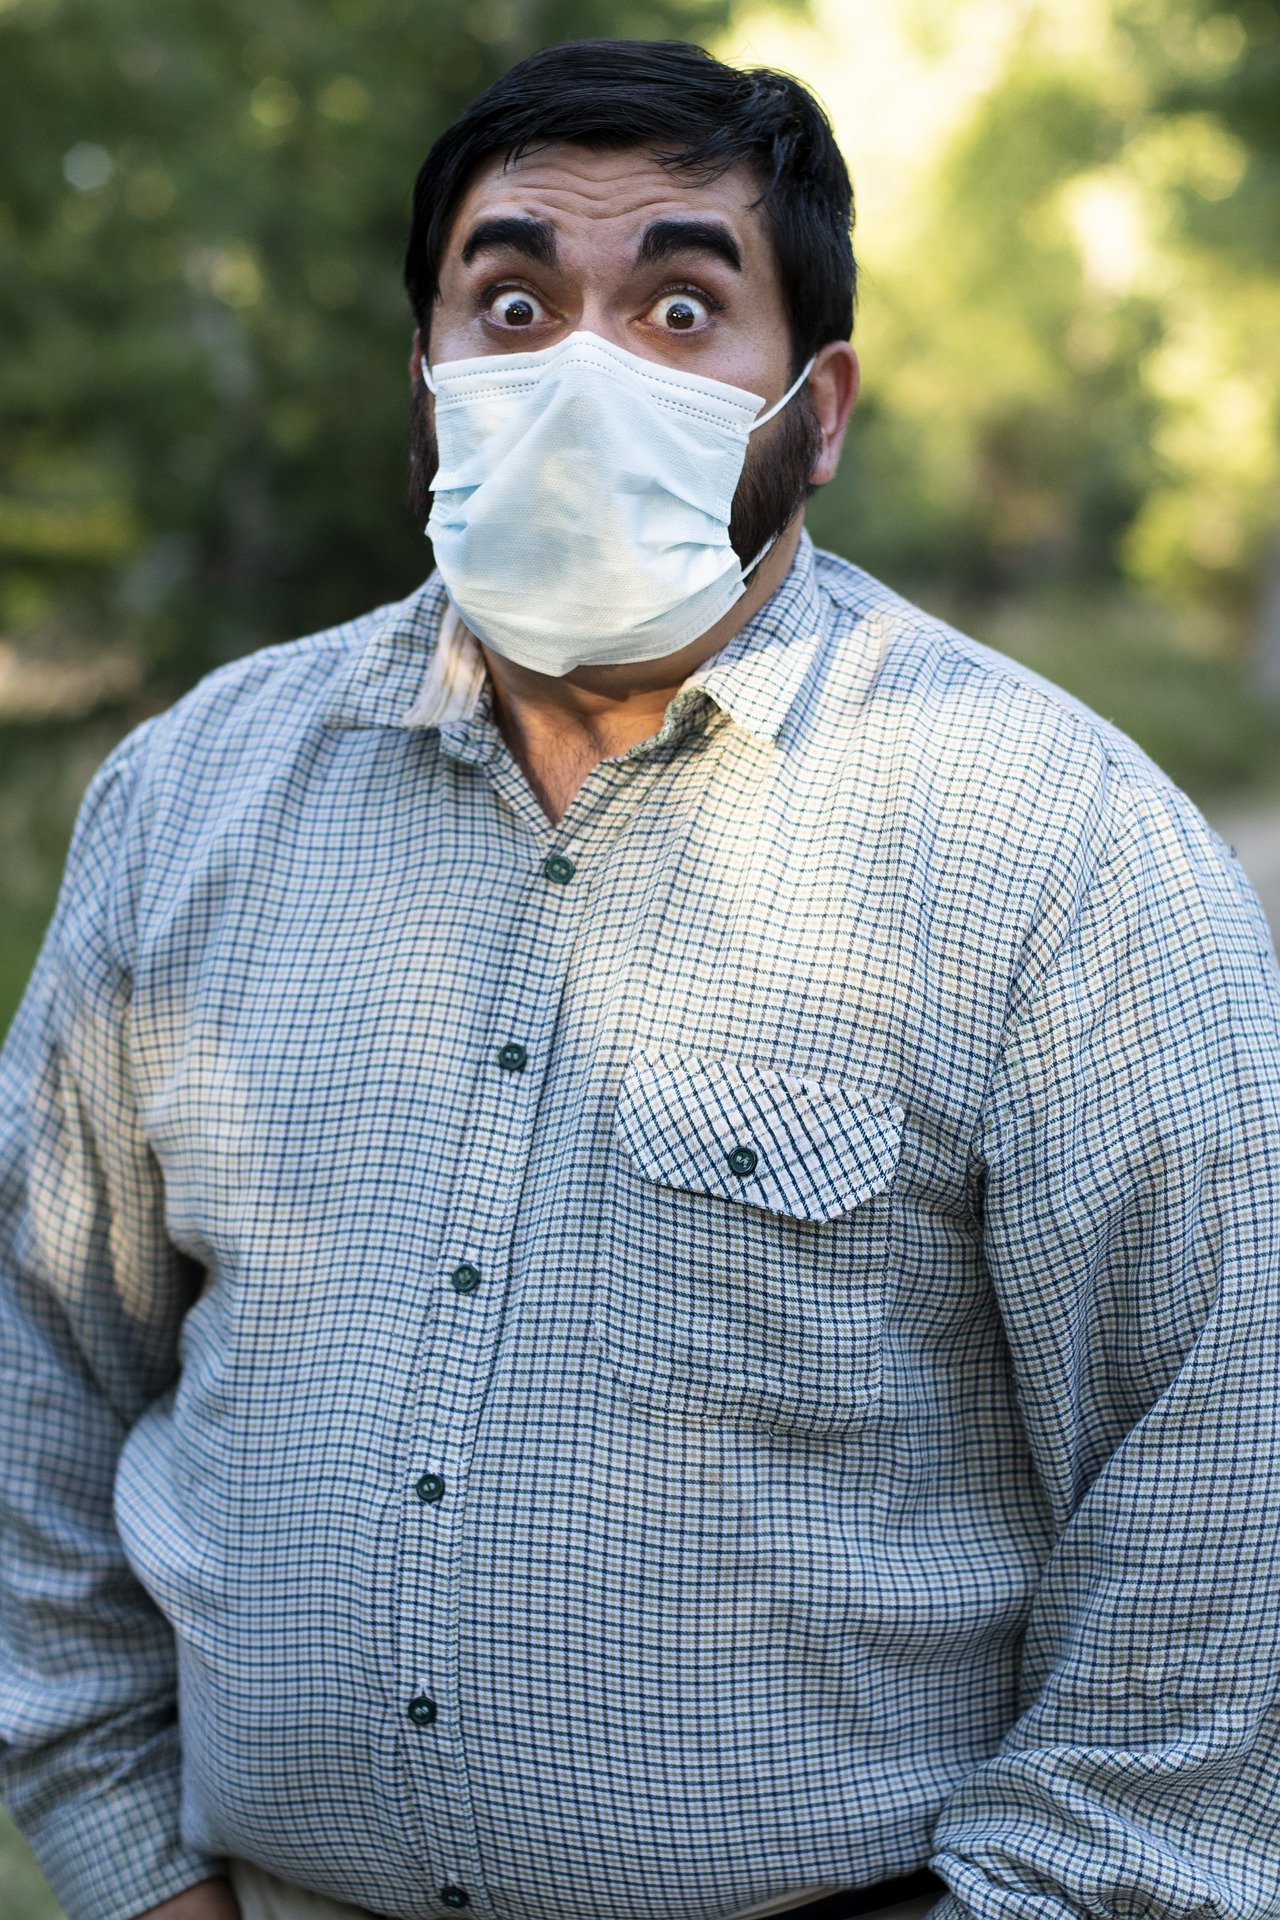 A frightened man standing in an open area with a face mask on | Photo: Pixabay/Sean Corcoran